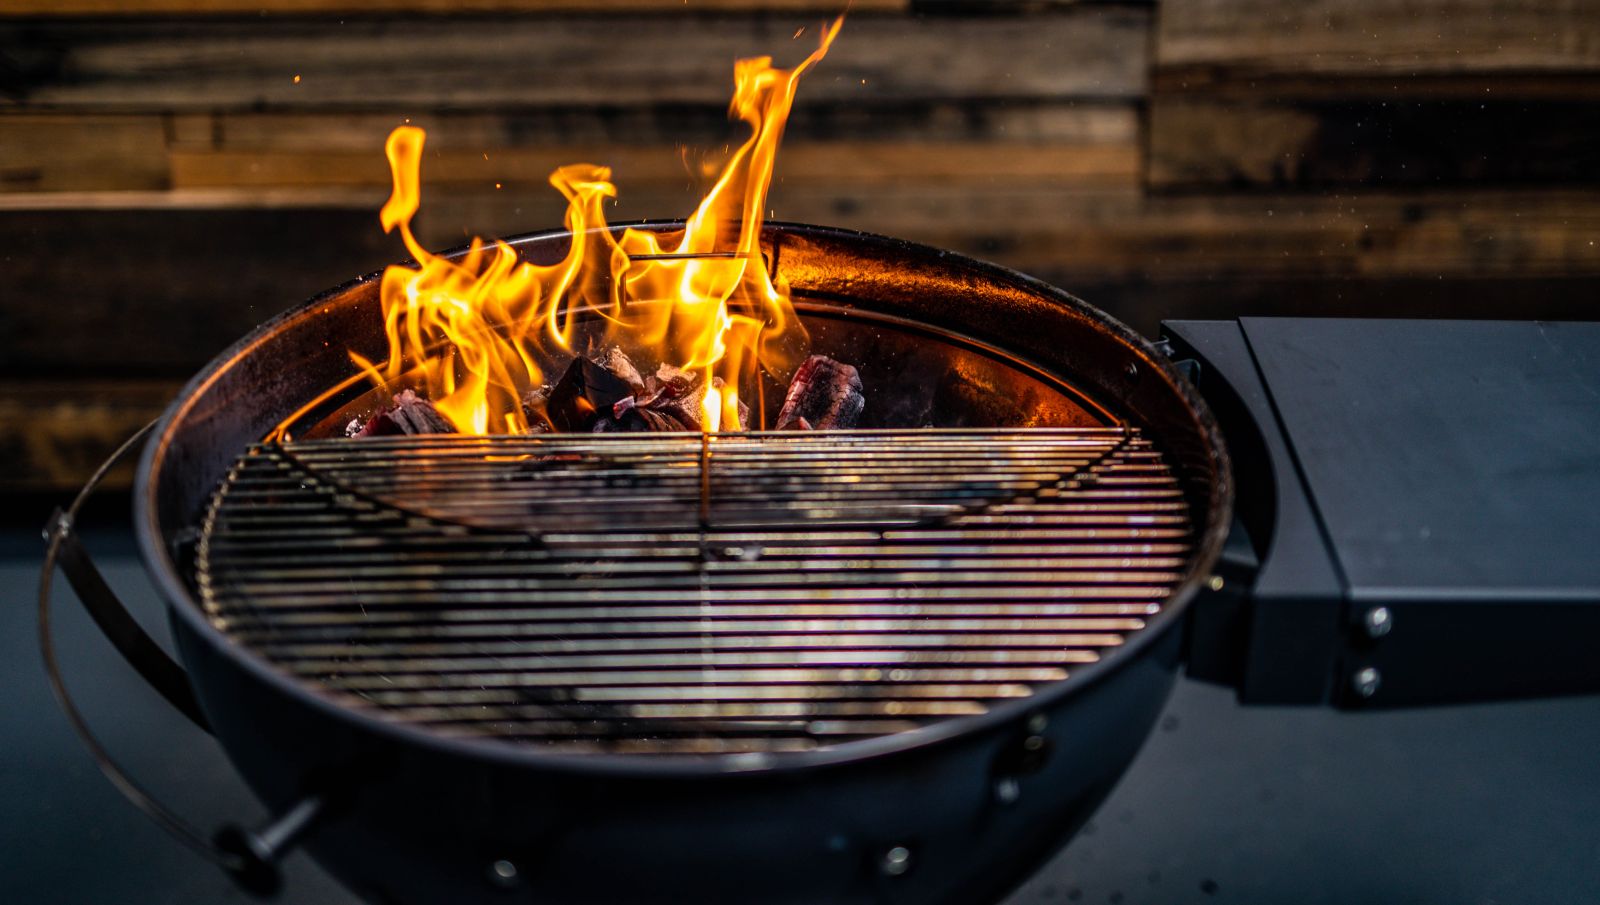 This_image_shows_Charcoal_being_lit_on_SNS_kettle_BBQ